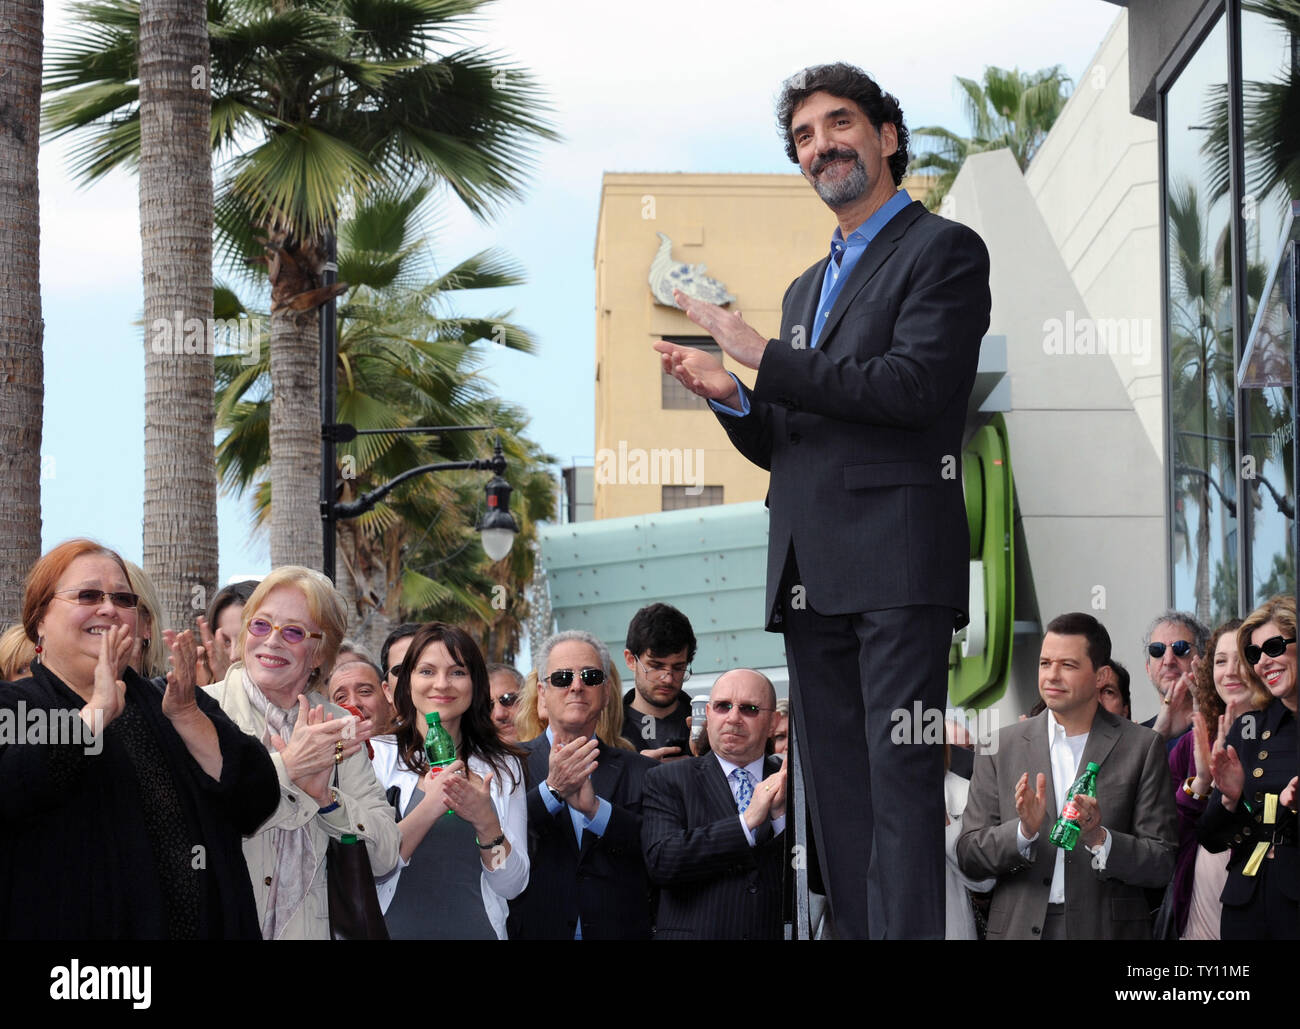 Chuck Lorre basks in the moments during ceremonies honoring him with the 2,380th star on the Hollywood Walk of Fame in Los Angeles on March 12, 2009. Lorre produces and co-created CBS' 'The Big Bang Theory' and 'Two and Half Men'. He also produced 'Dharma & Greg'' and 'Grace Under Fire'. (UPI Photo/Jim Ruymen) Stock Photo